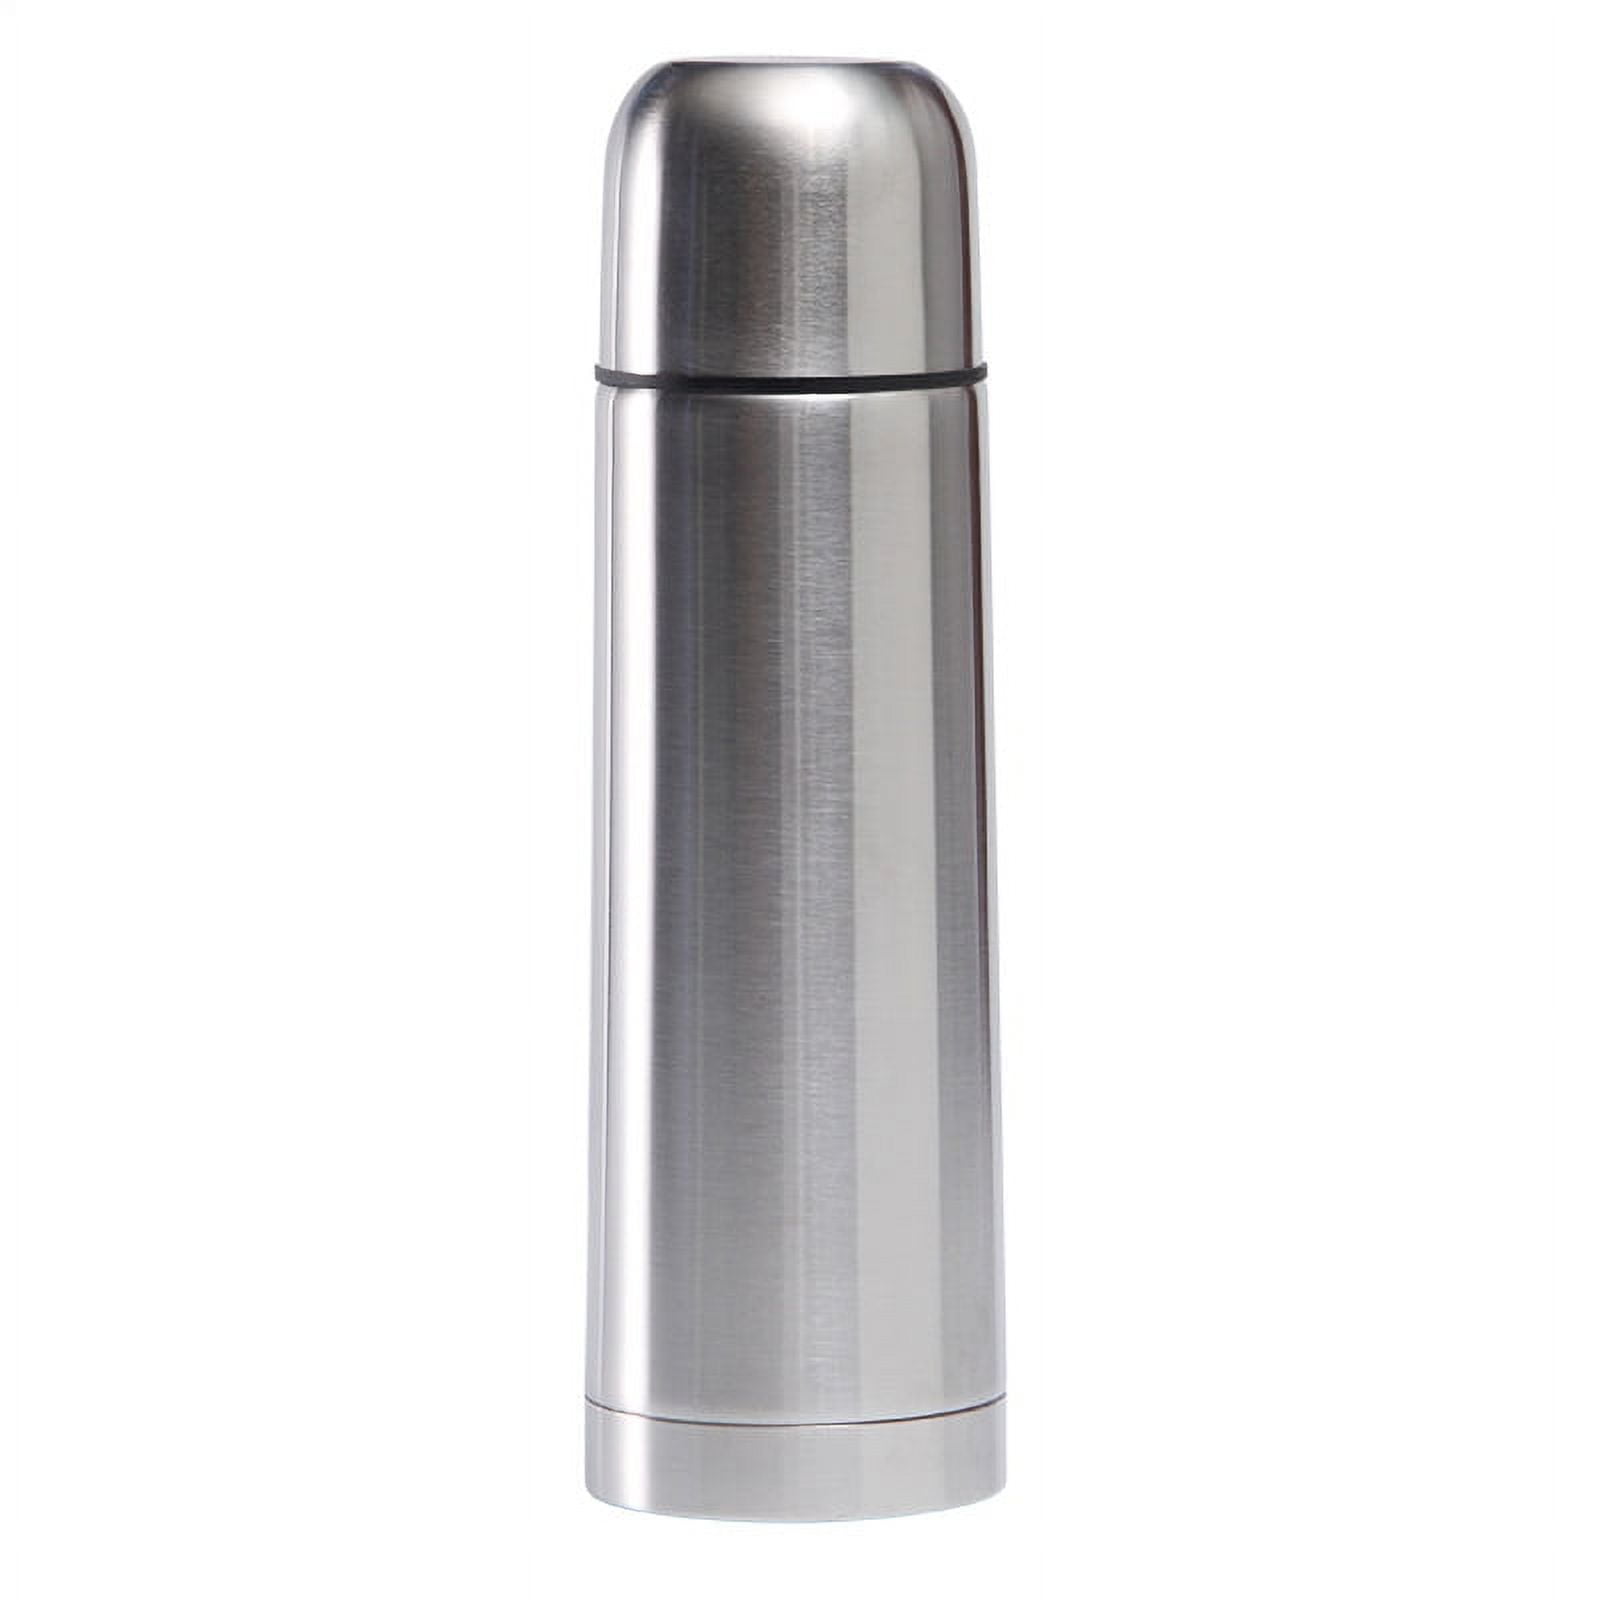 HoneyBee Thermos for Hot Drinks Keeps Liquid Hot or Cold for Up to 24 Hours  Thermos 41 Ounce Coffee Thermos 18/8 Stainless Steel Bpa-Free Insulated